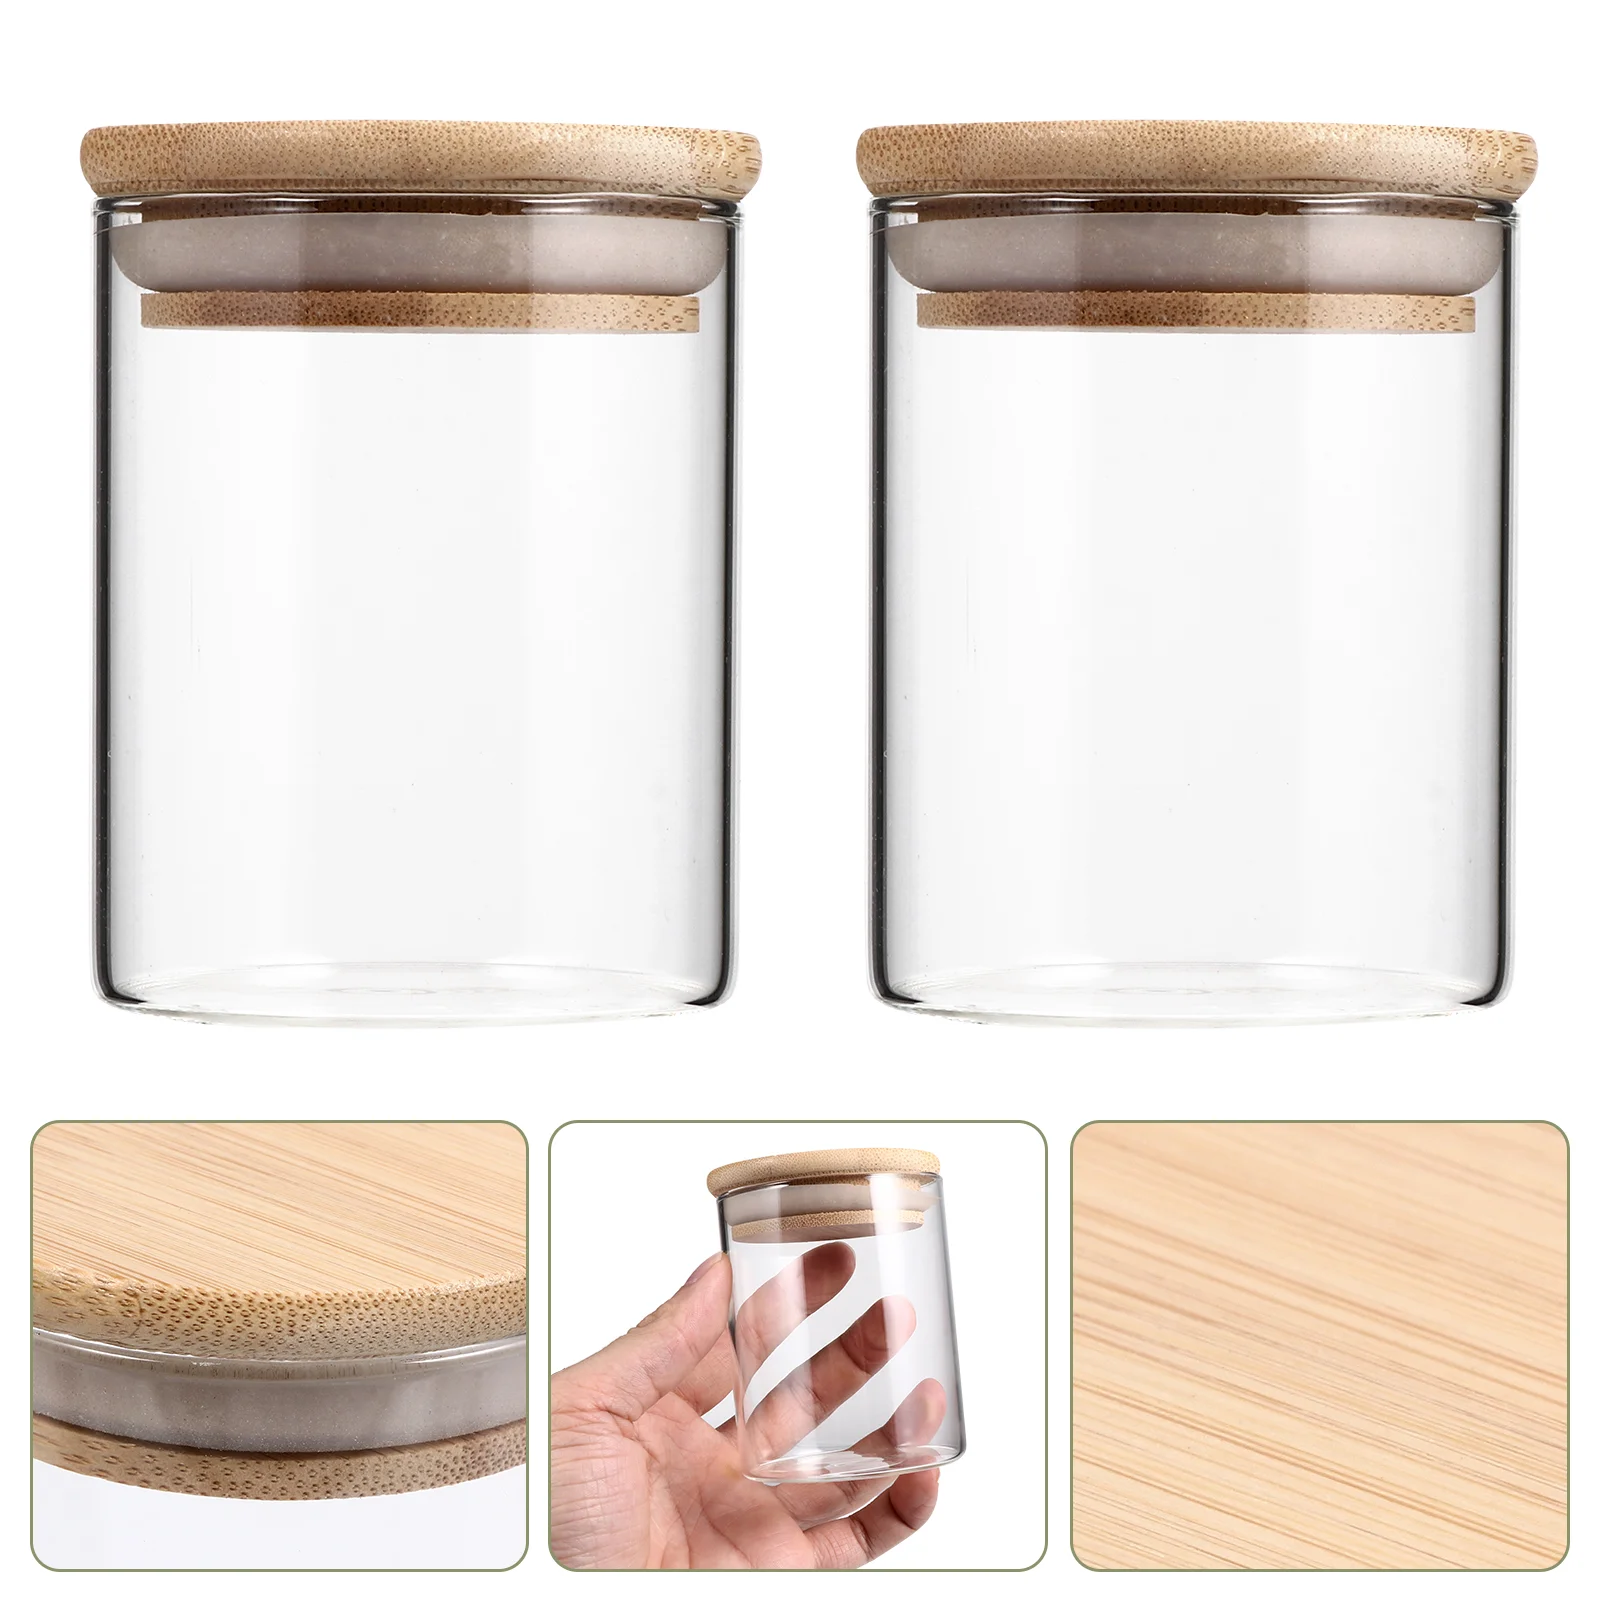 Buy Tea Jars Glass Storagespices Canisters Canister Jar Loose Clear Containers Container Flour Salt Airtight Sugar Sealed on